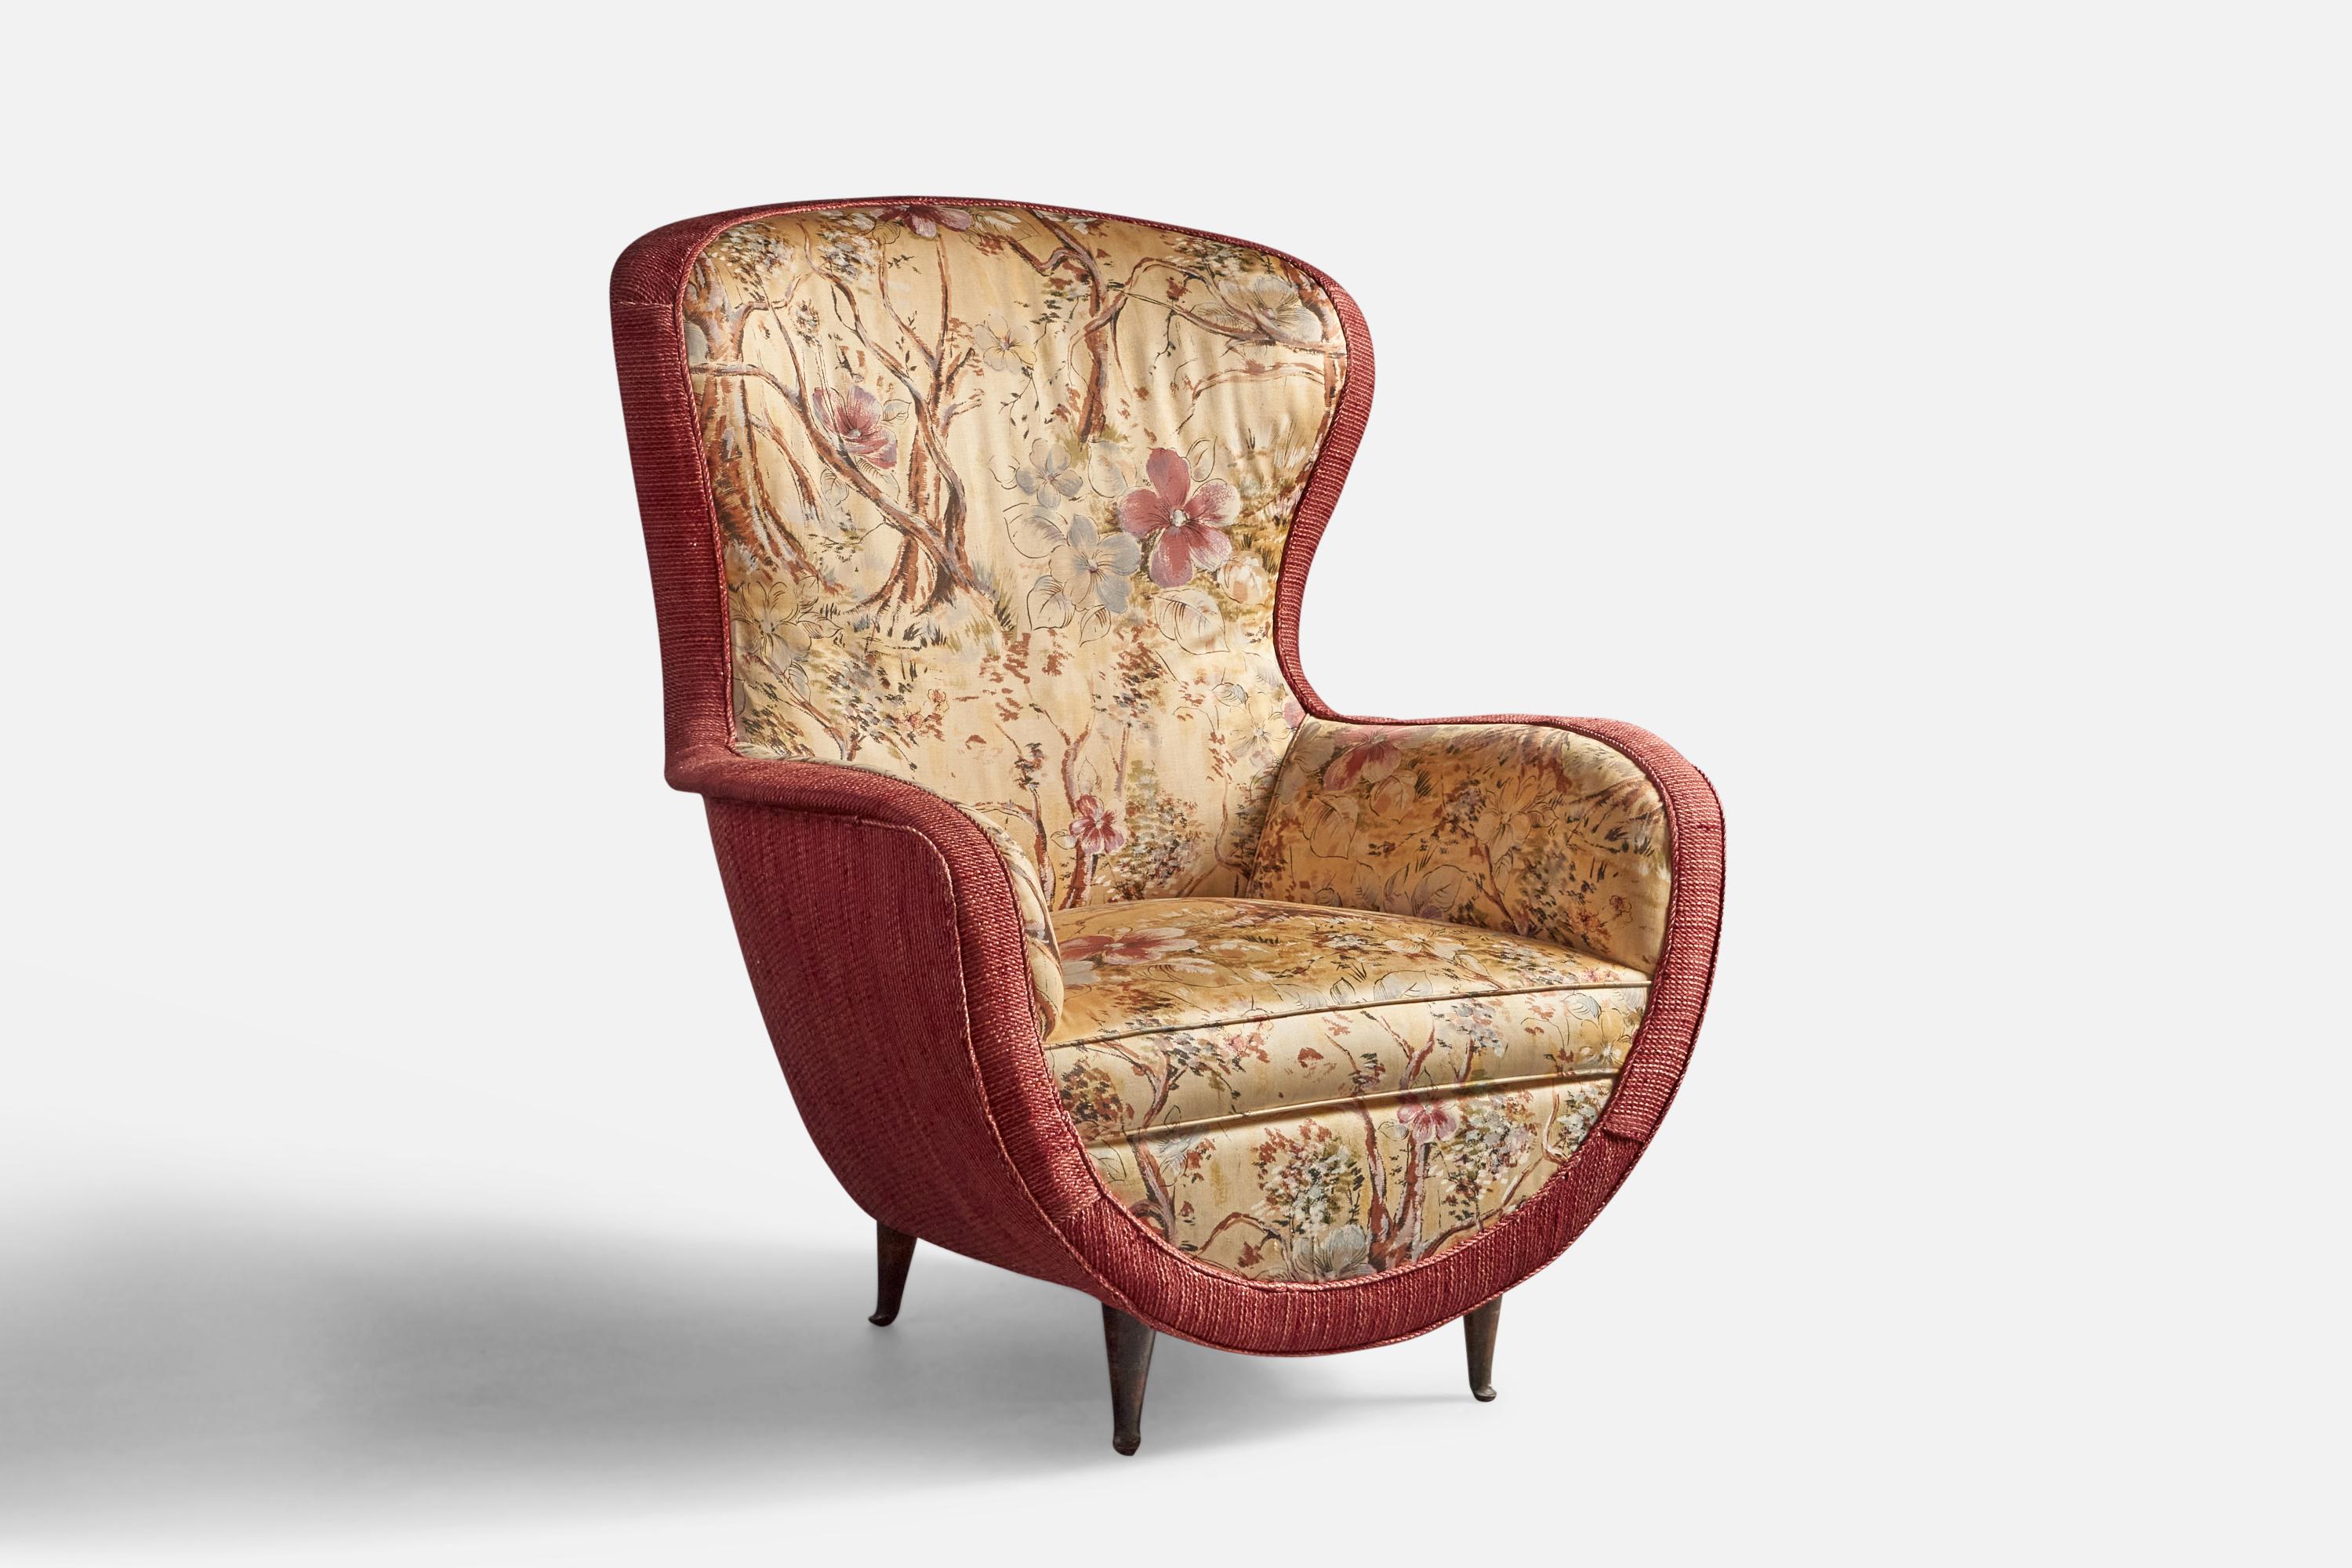 A red and printed floral fabric and wood lounge chair, designed and produced in Italy, 1940s.
